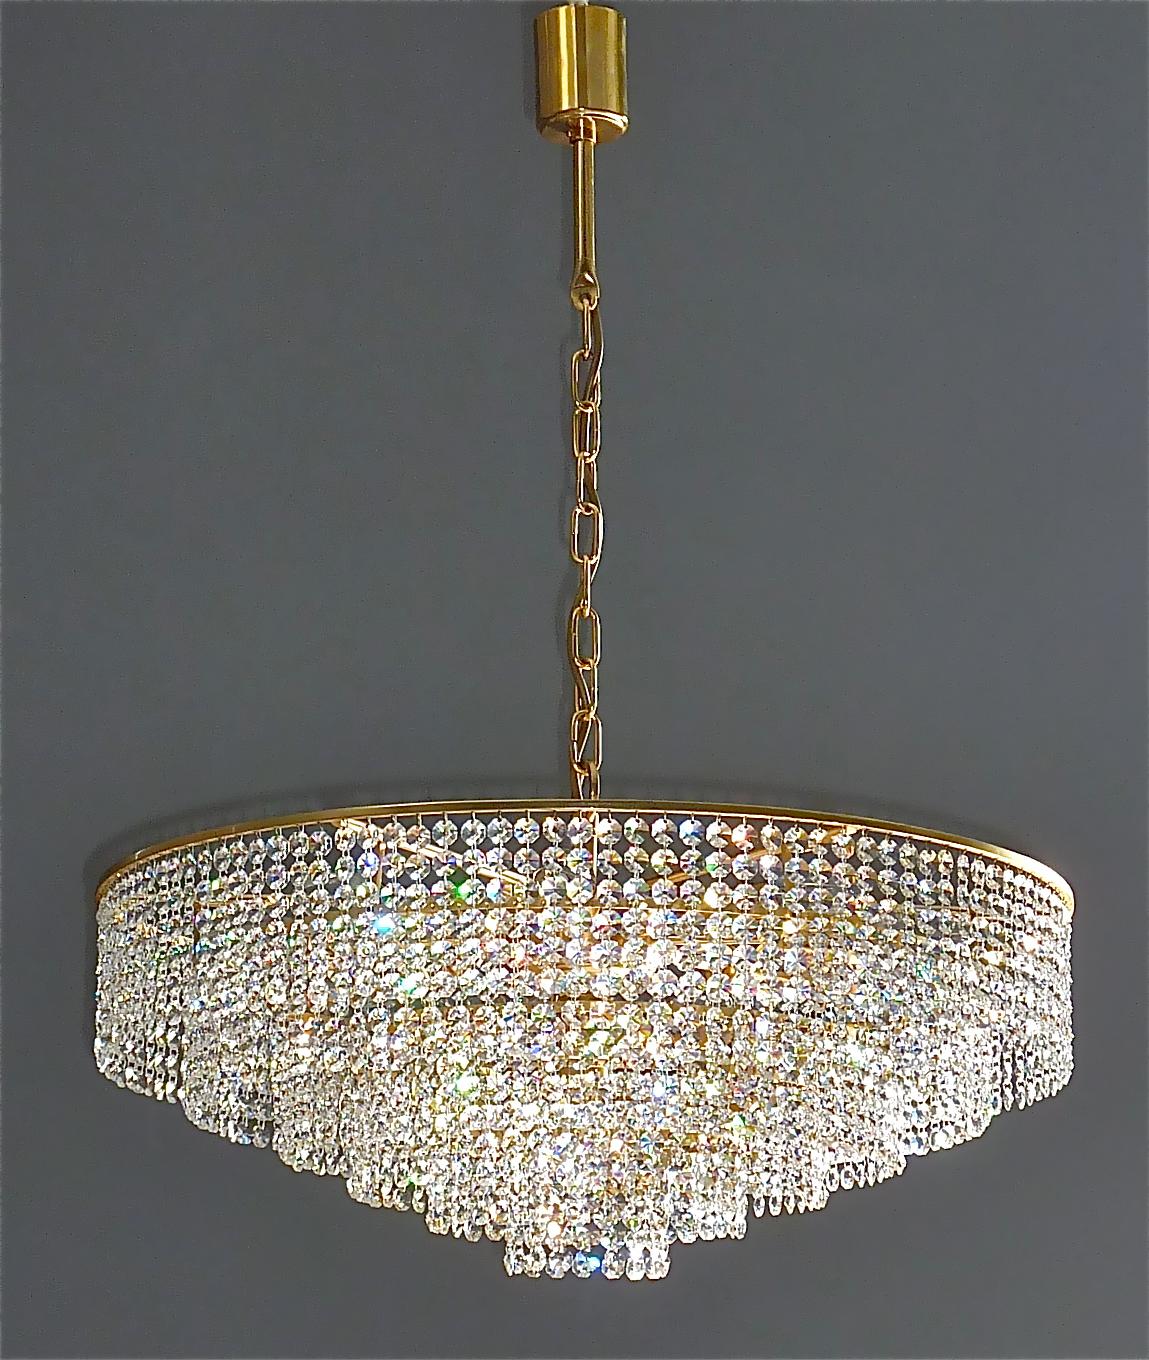 Classic extra large and precious gilt brass and crystal glass chandelier made by high class lighting company Palwa, Germany, circa 1960. The chain-hanging chandelier has 6 cascading tiers with lots of high lead handcut faceted crystal glass strings